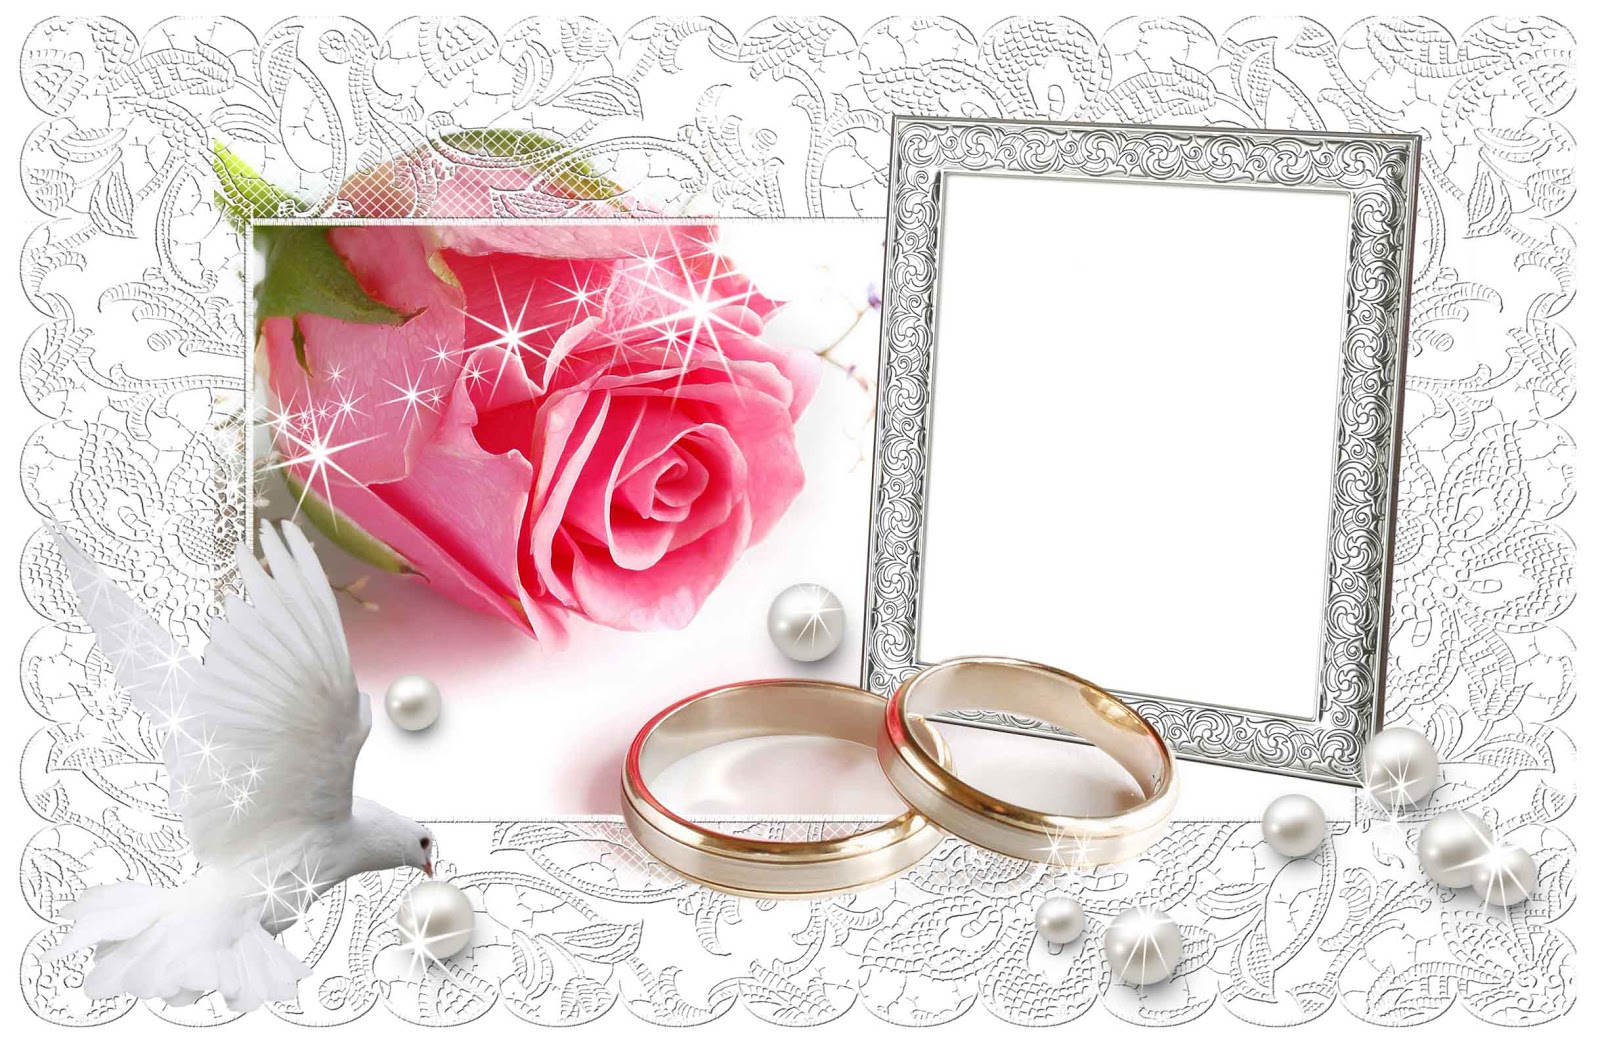 31 Awesome Wedding Frames Png Free Download - Wedding Download, Transparent background PNG HD thumbnail